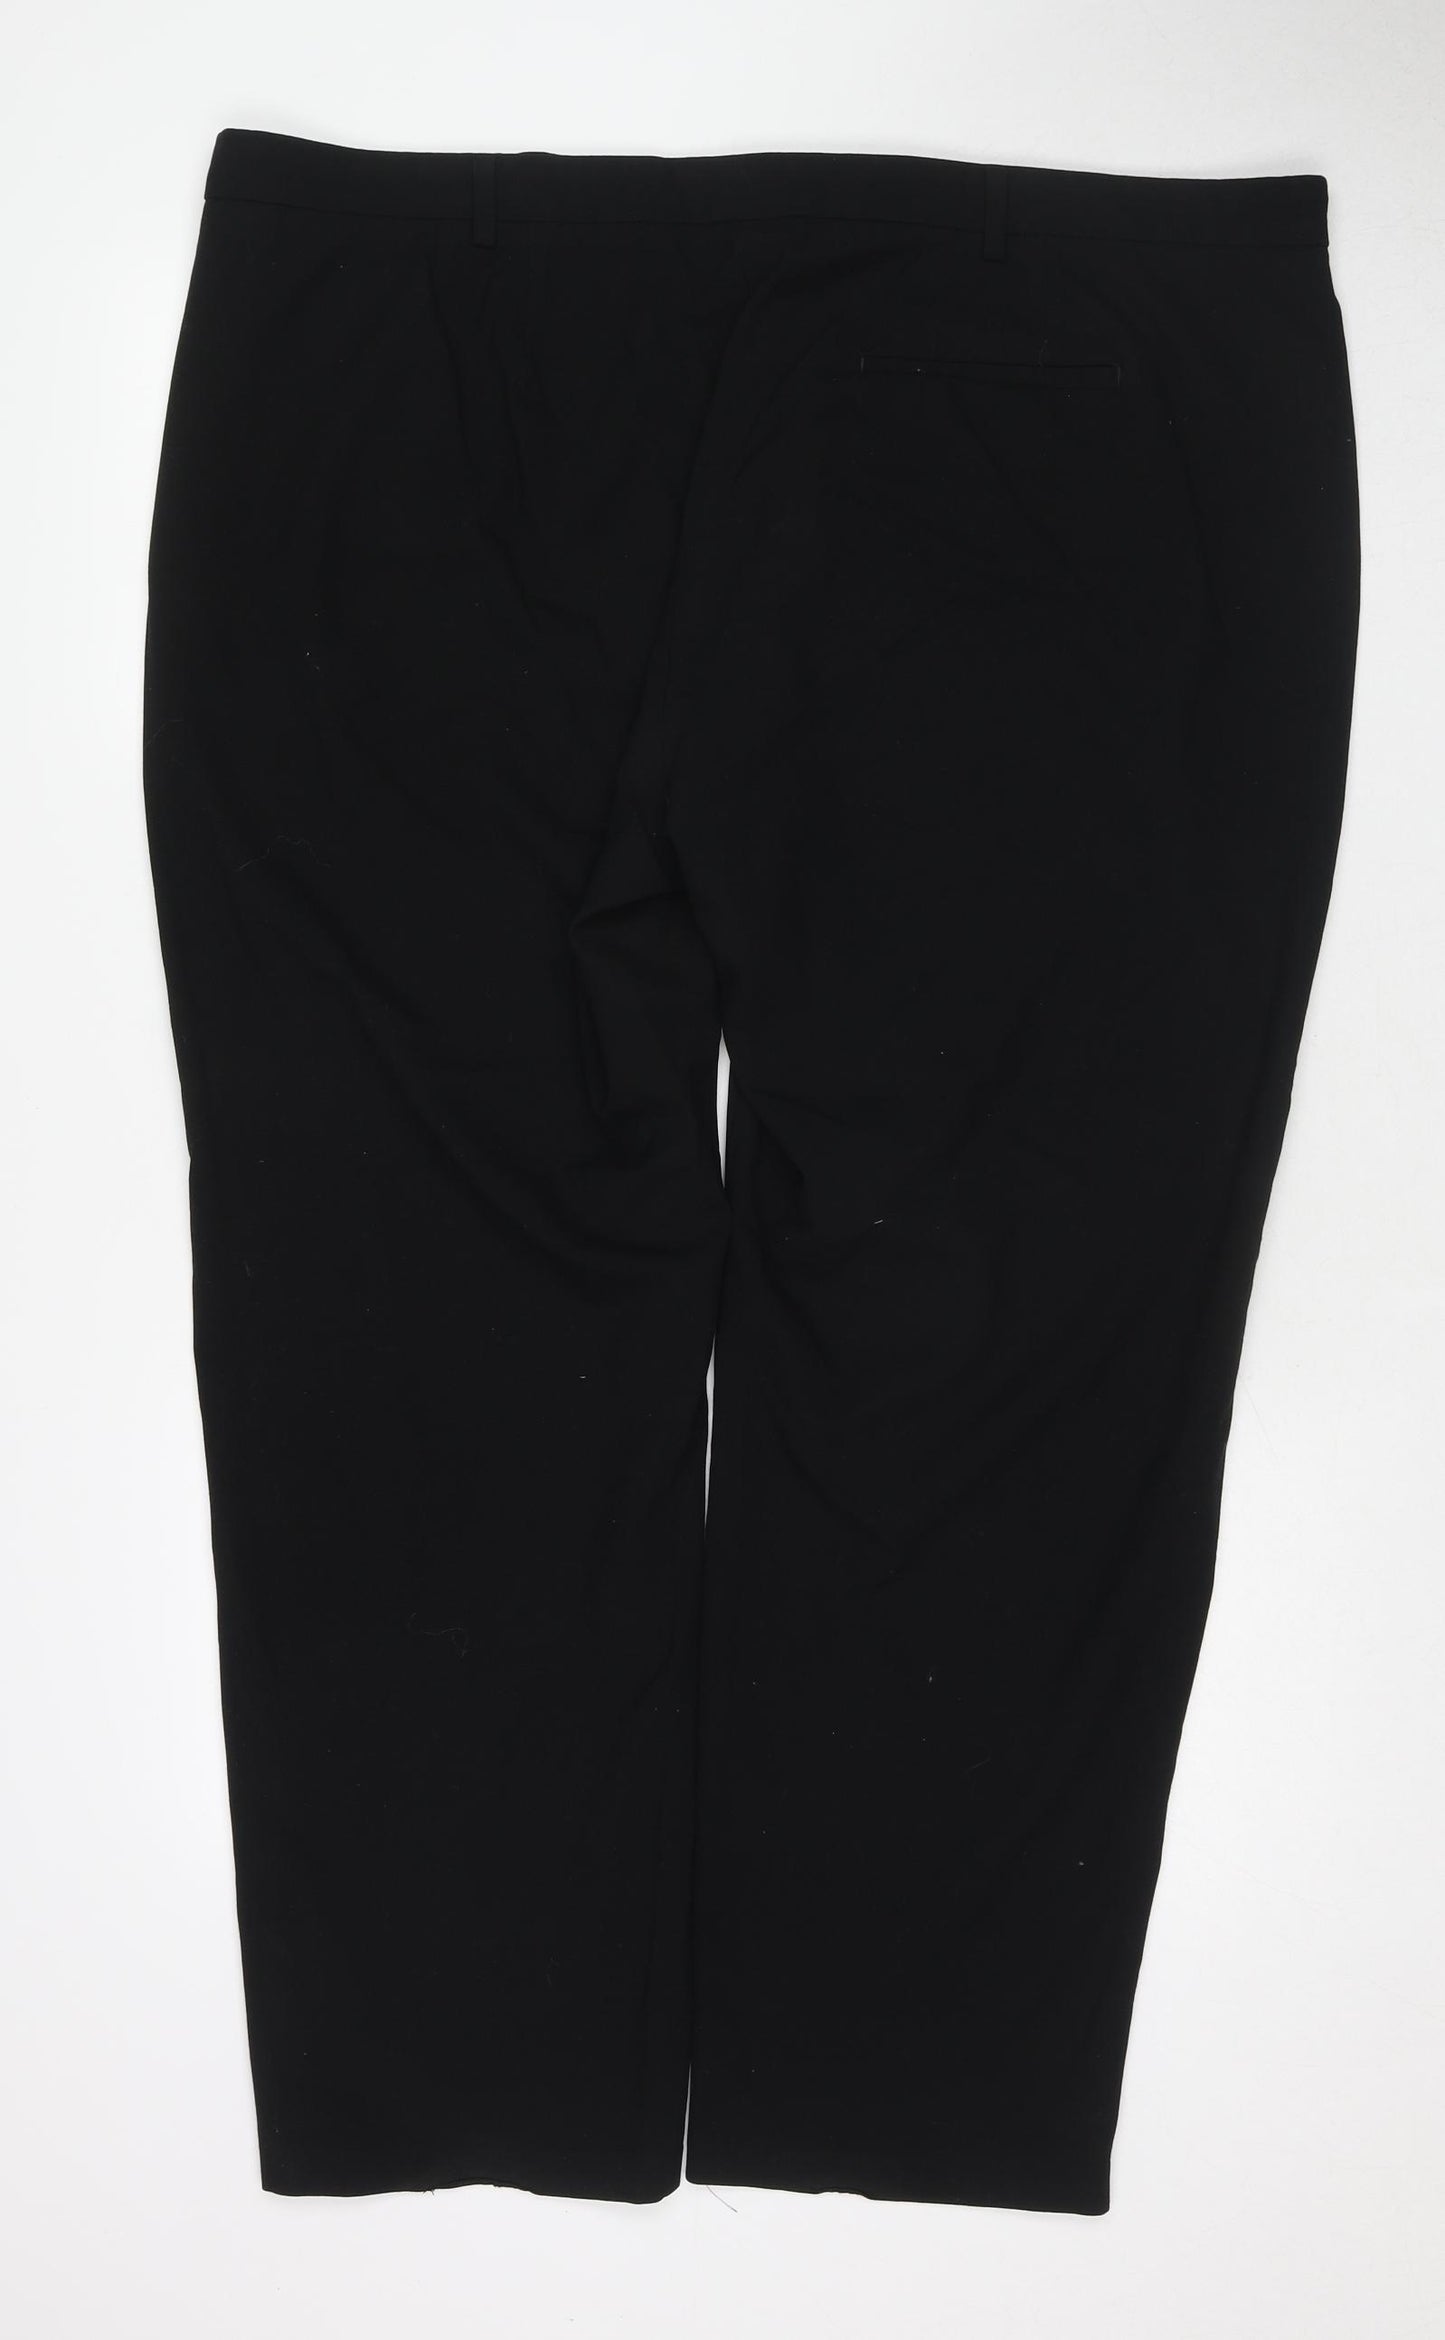 Marks and Spencer Womens Black Polyester Dress Pants Trousers Size 24 Regular